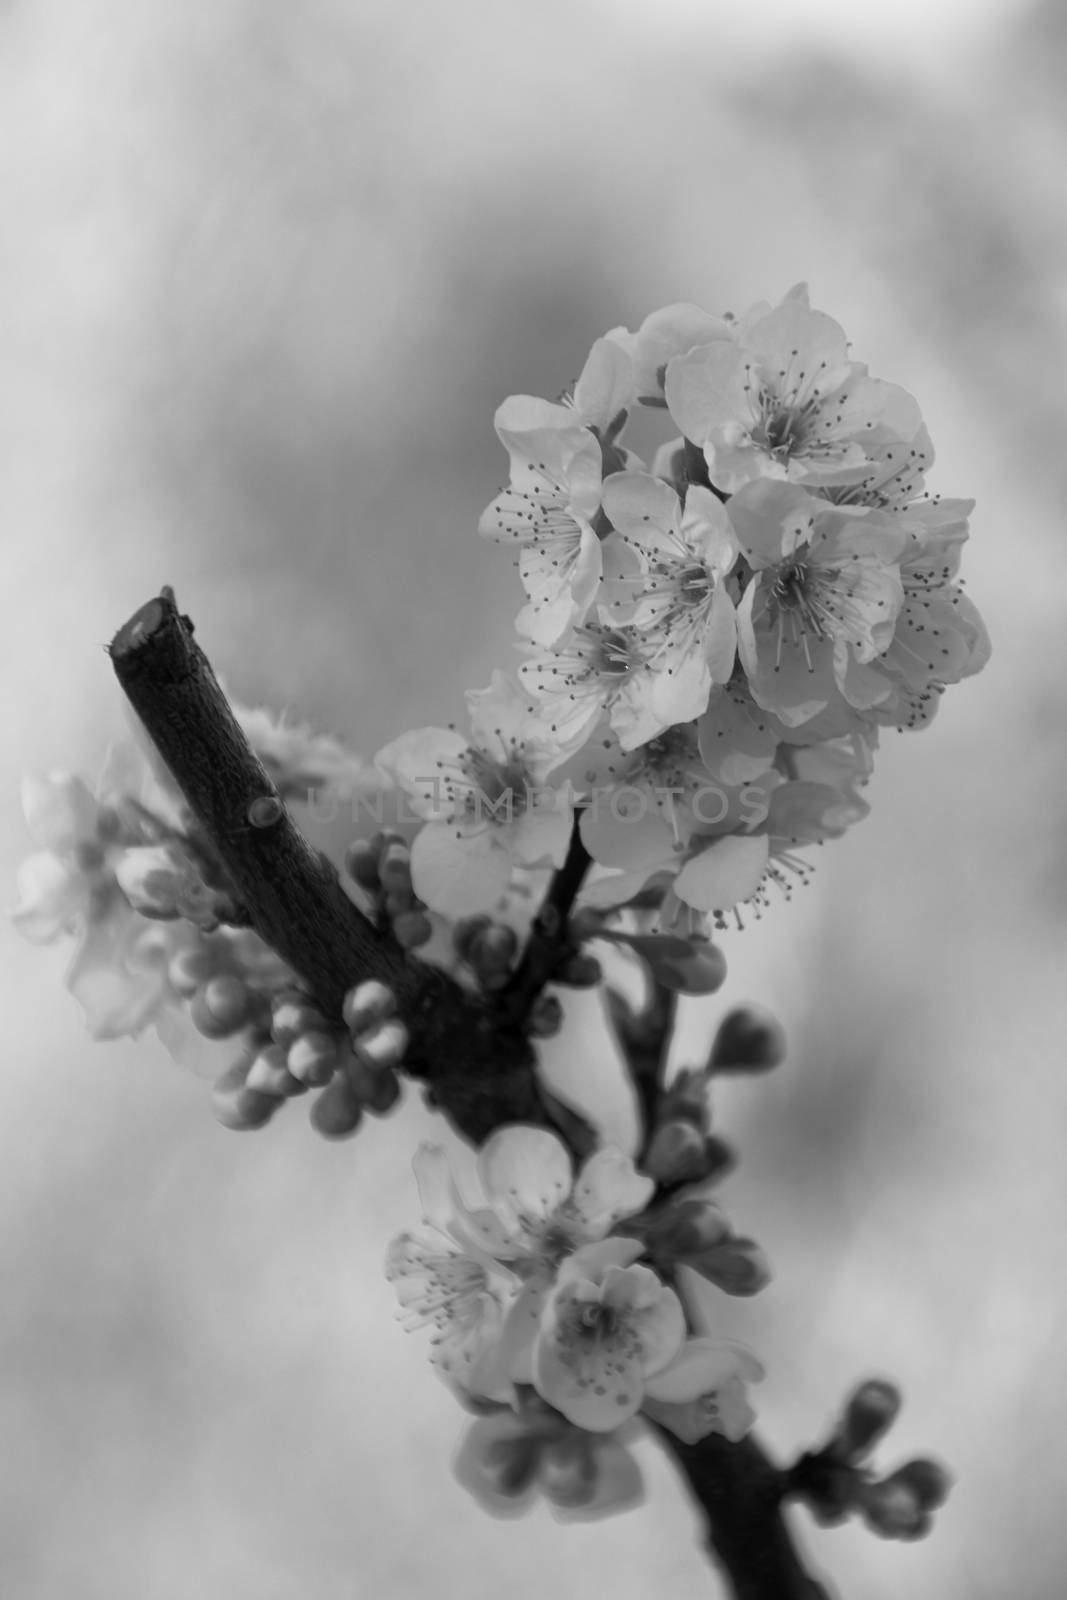 Cherry blossoms in bright day, unfocused background, branch, black and white